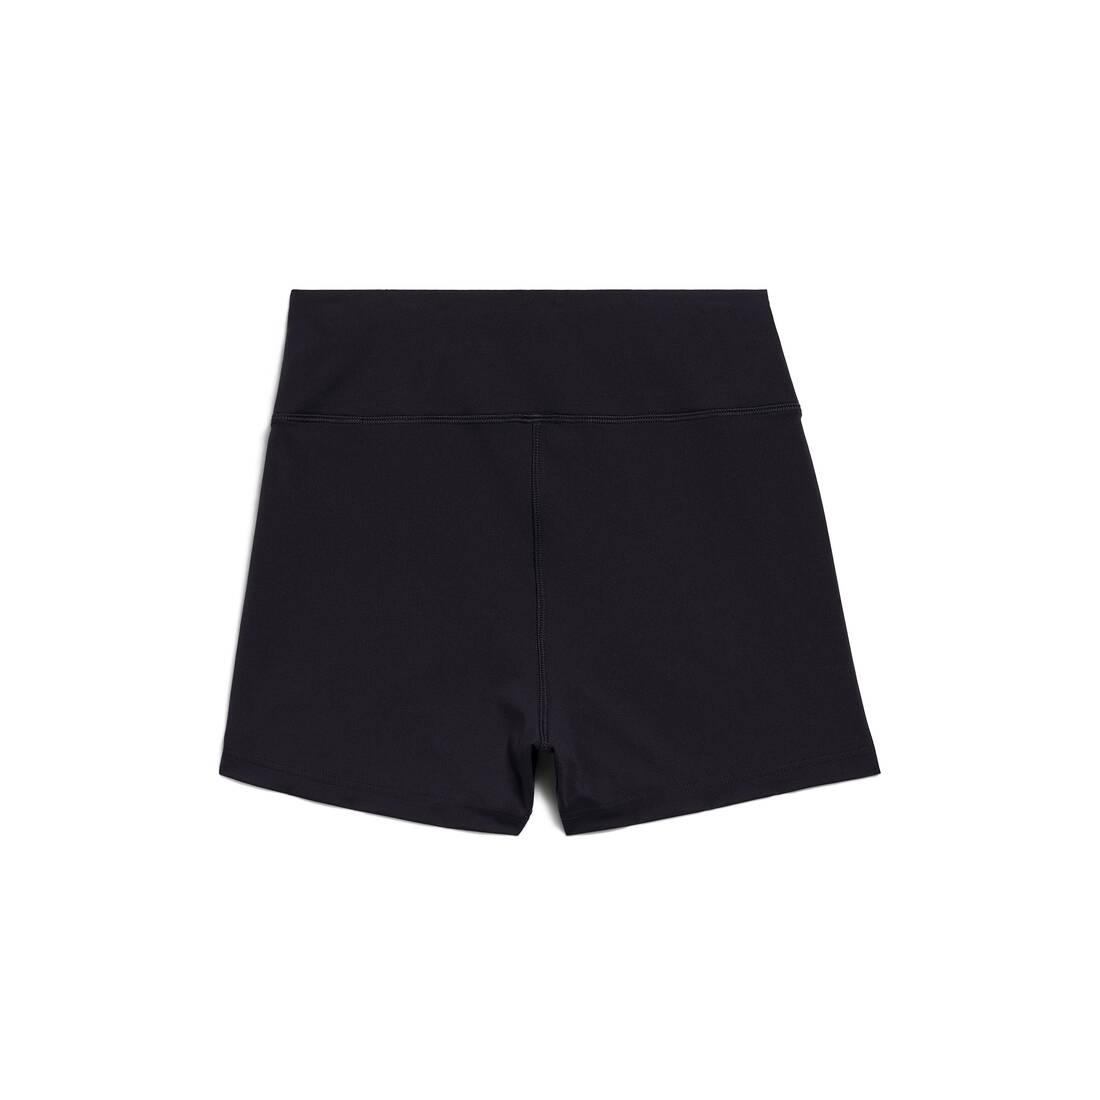 Women's Activewear Cycling Shorts in Black